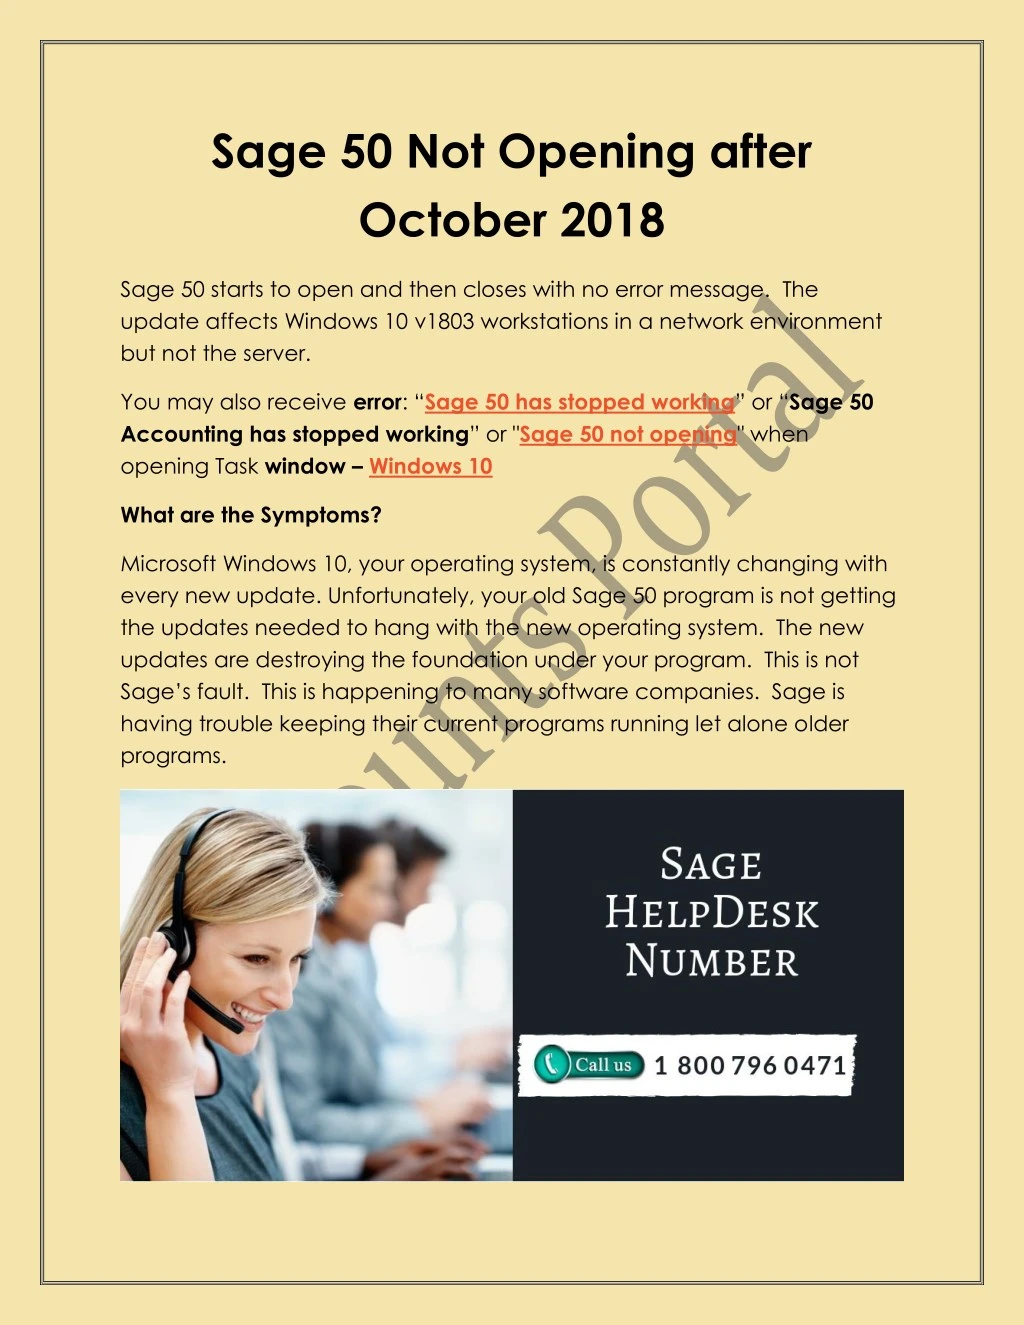 sage 50 not opening after october 2018